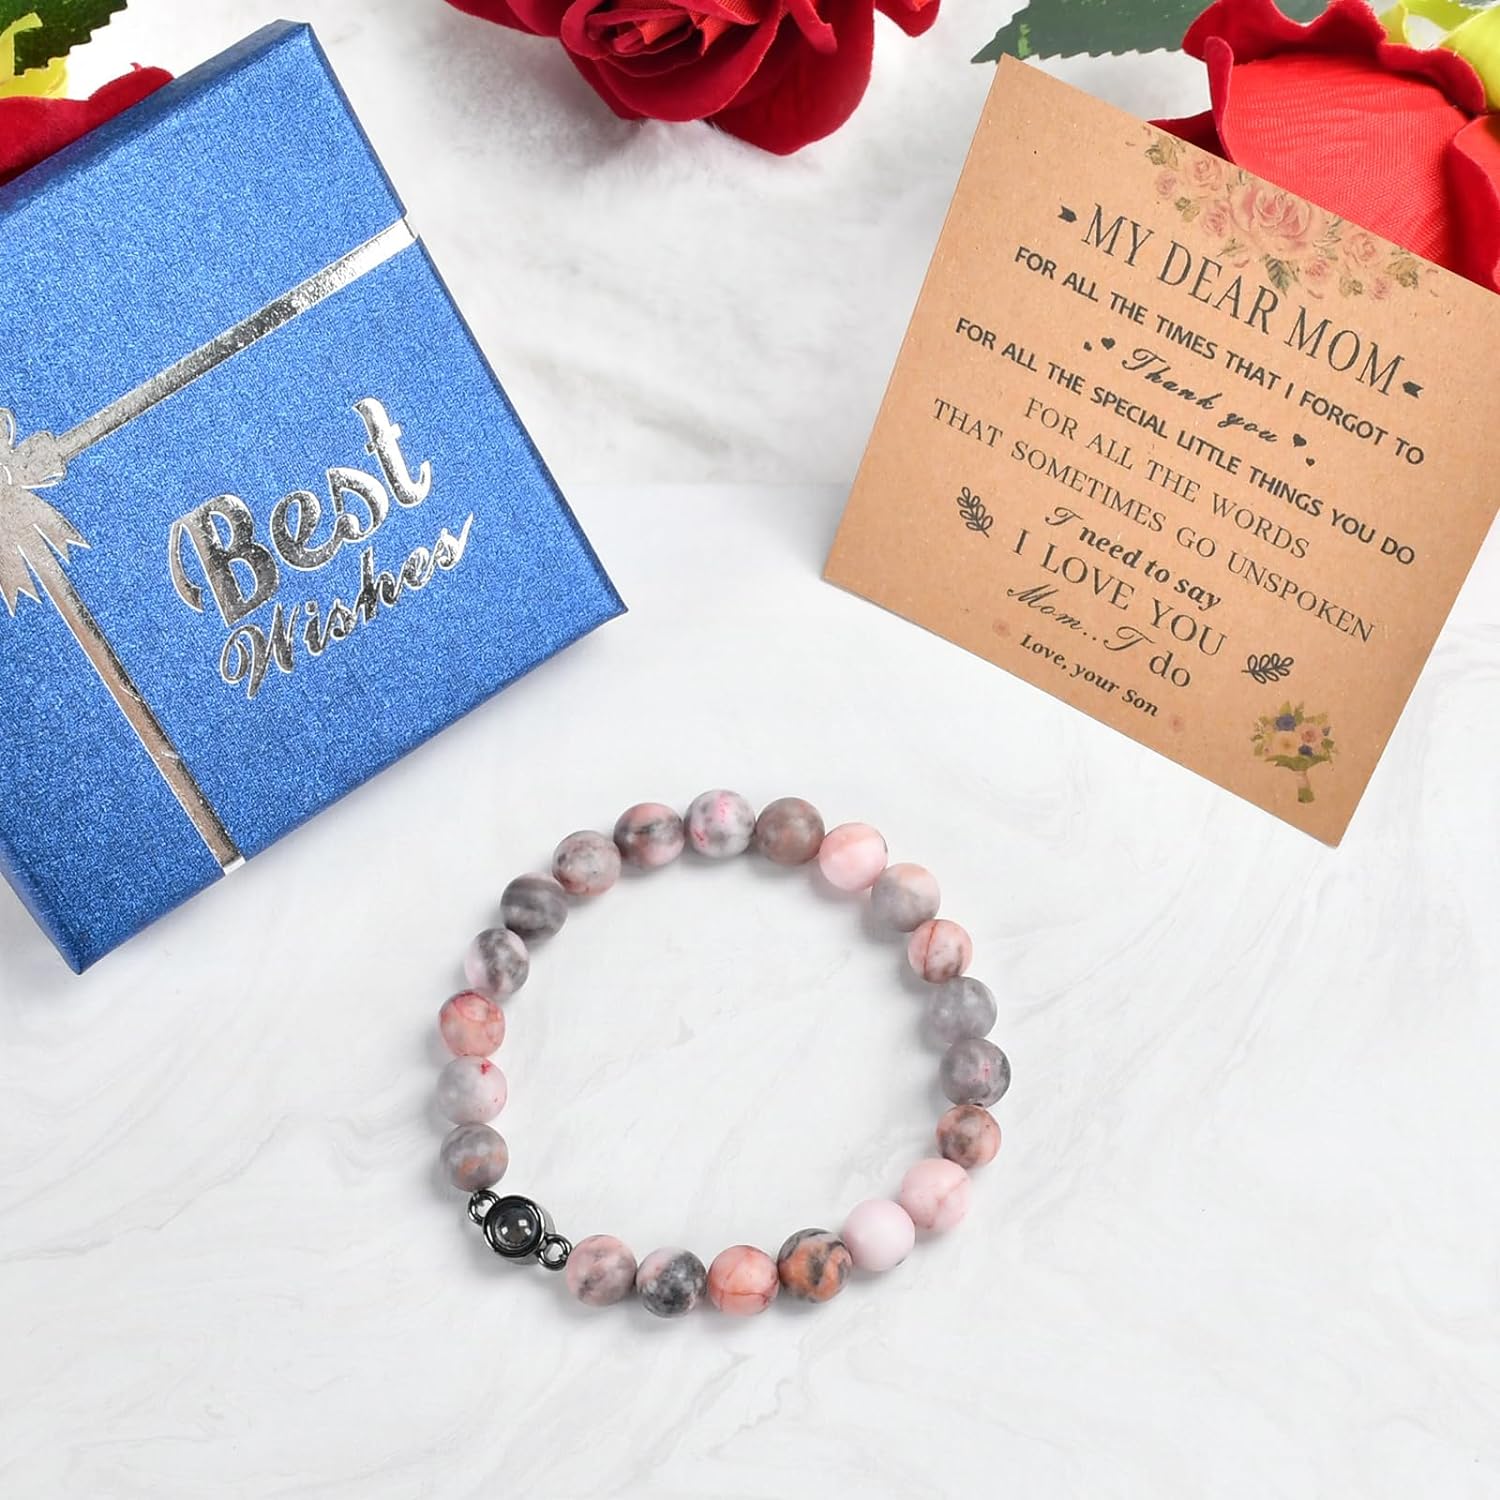 Mothers Day Gifts From Daughter Birthday Gifts For Mom Gifts Moonstone Bracelet I Love You 100 Languages Bracelets Gifts For Grandma Women Mothers Day Mom Gifts